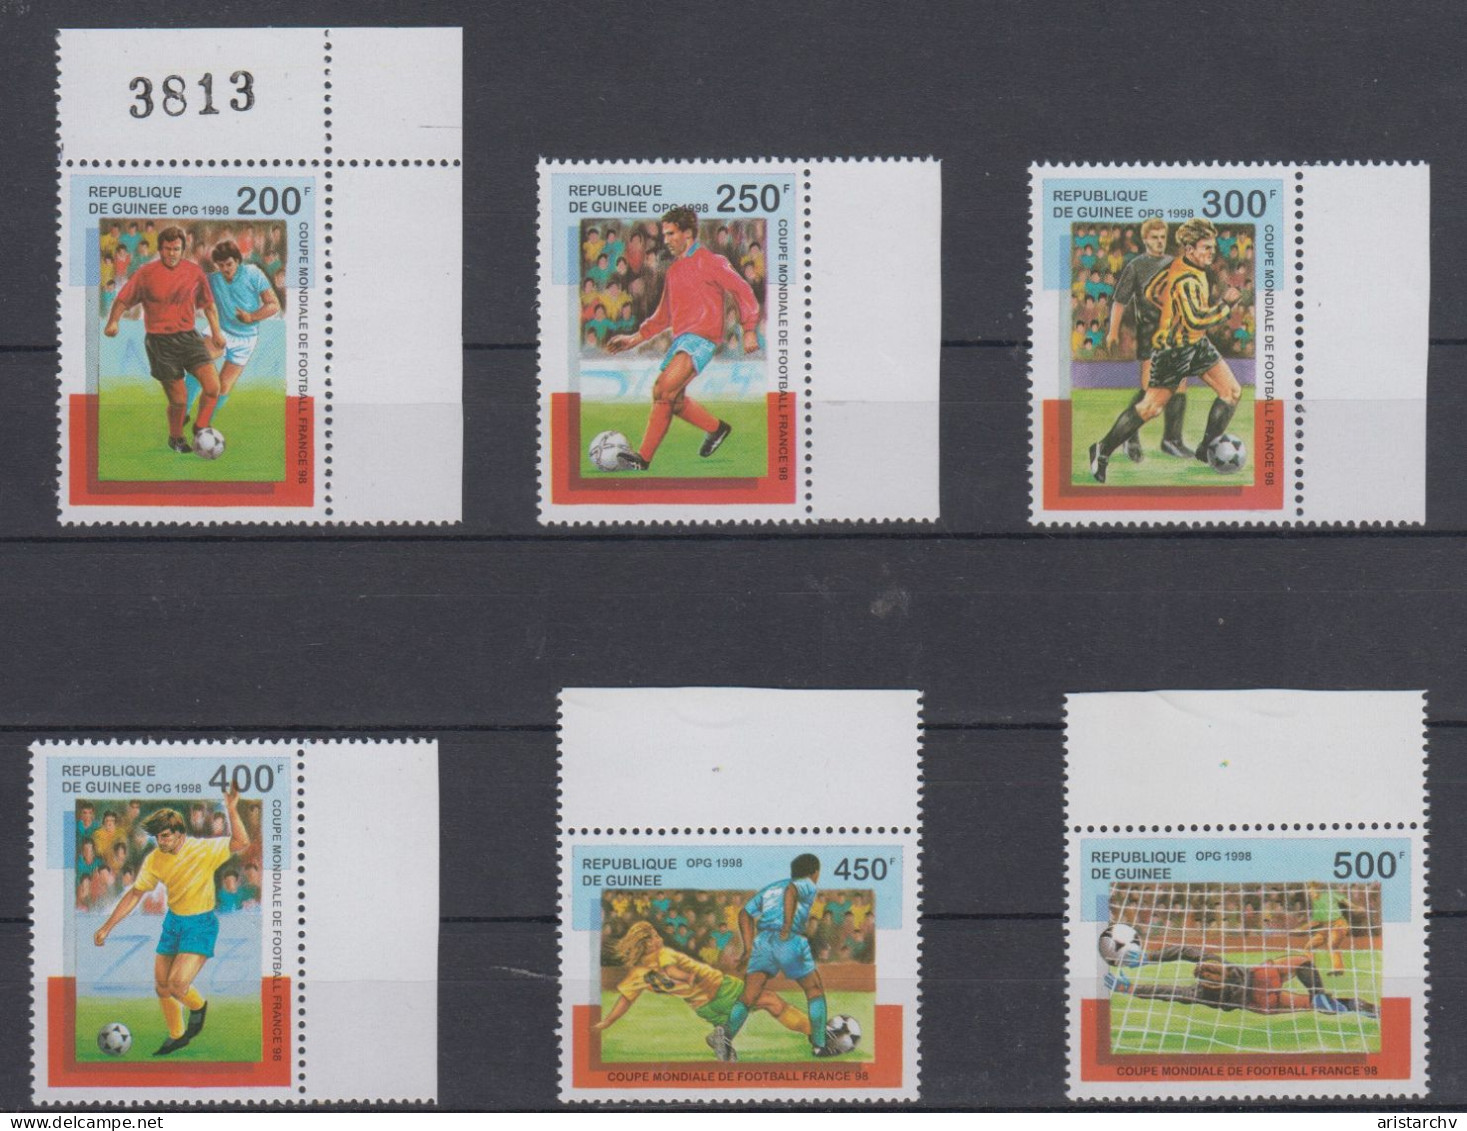 GUINEE 1998 FOOTBALL WORLD CUP S/SHEET AND 6 STAMPS - 1998 – Francia